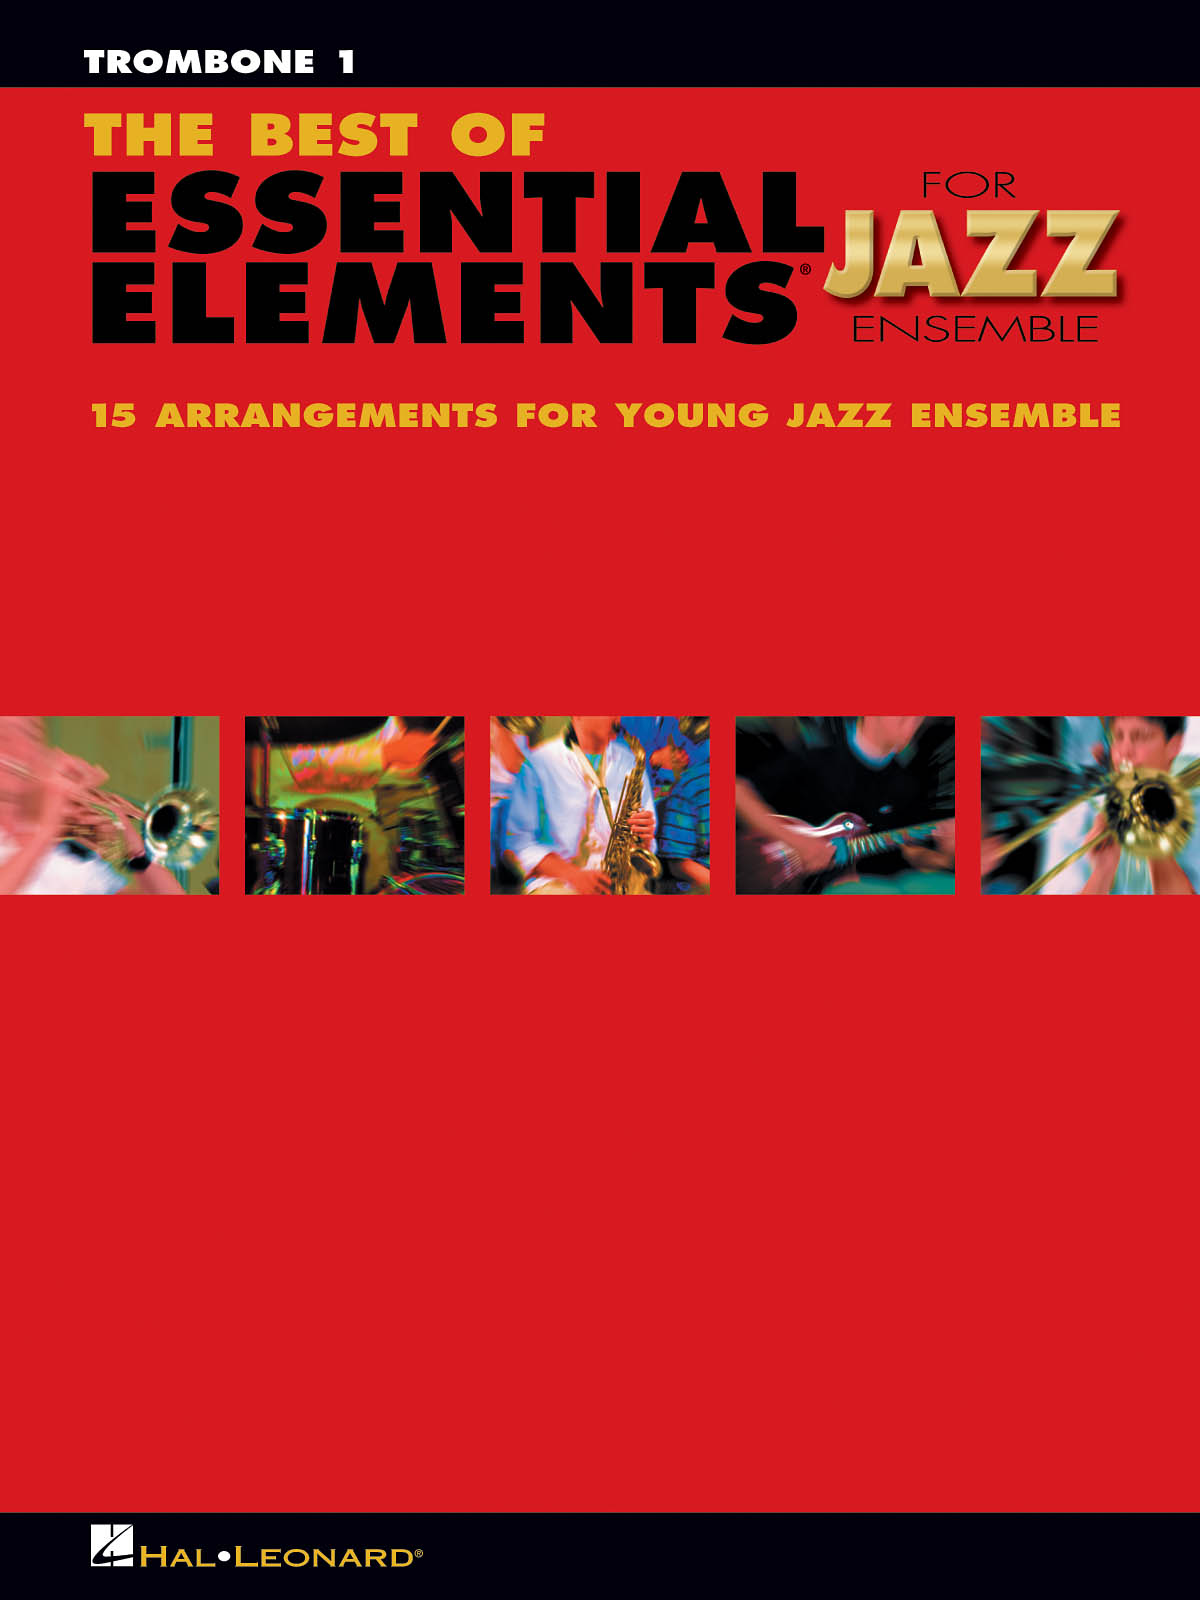 The Best of Essential Elements For Jazz Ensemble (Trombone 1)